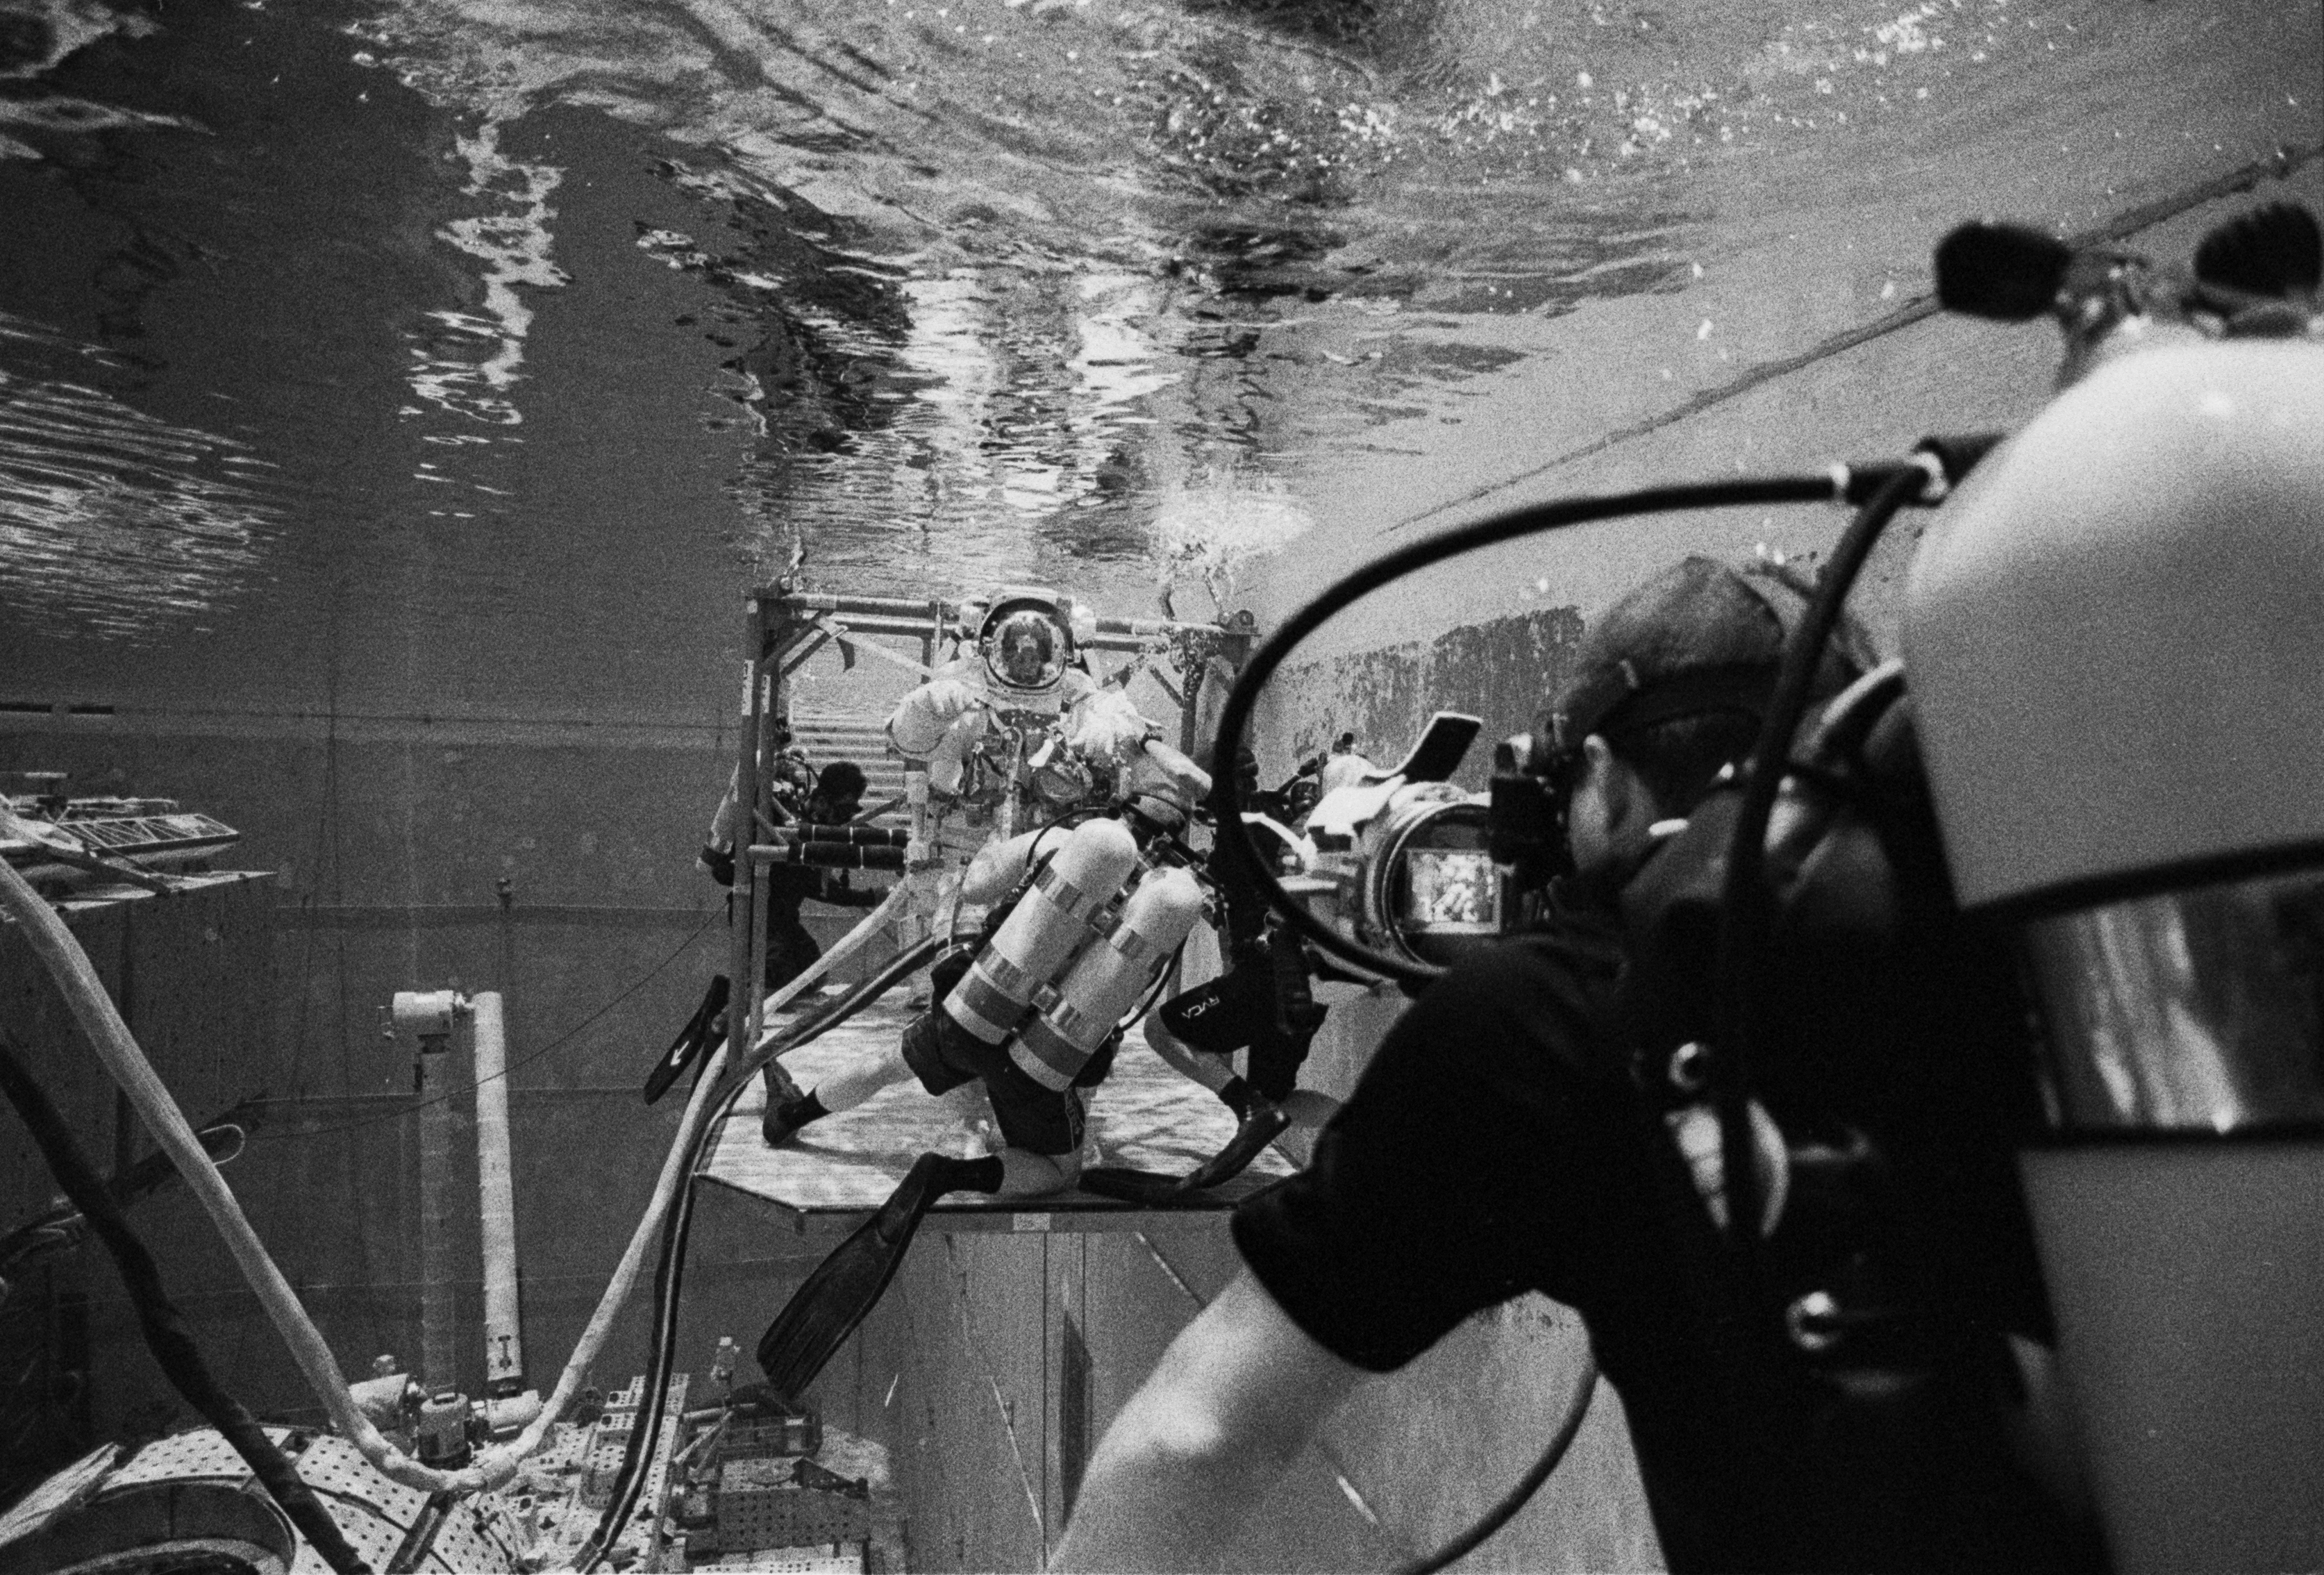 NASA crew members are lowered into the pool via a jib crane and secured into a donning stand. The divers await commands given by the test director before beginning egress of the donning stand. Photo by Moe Lauchert.